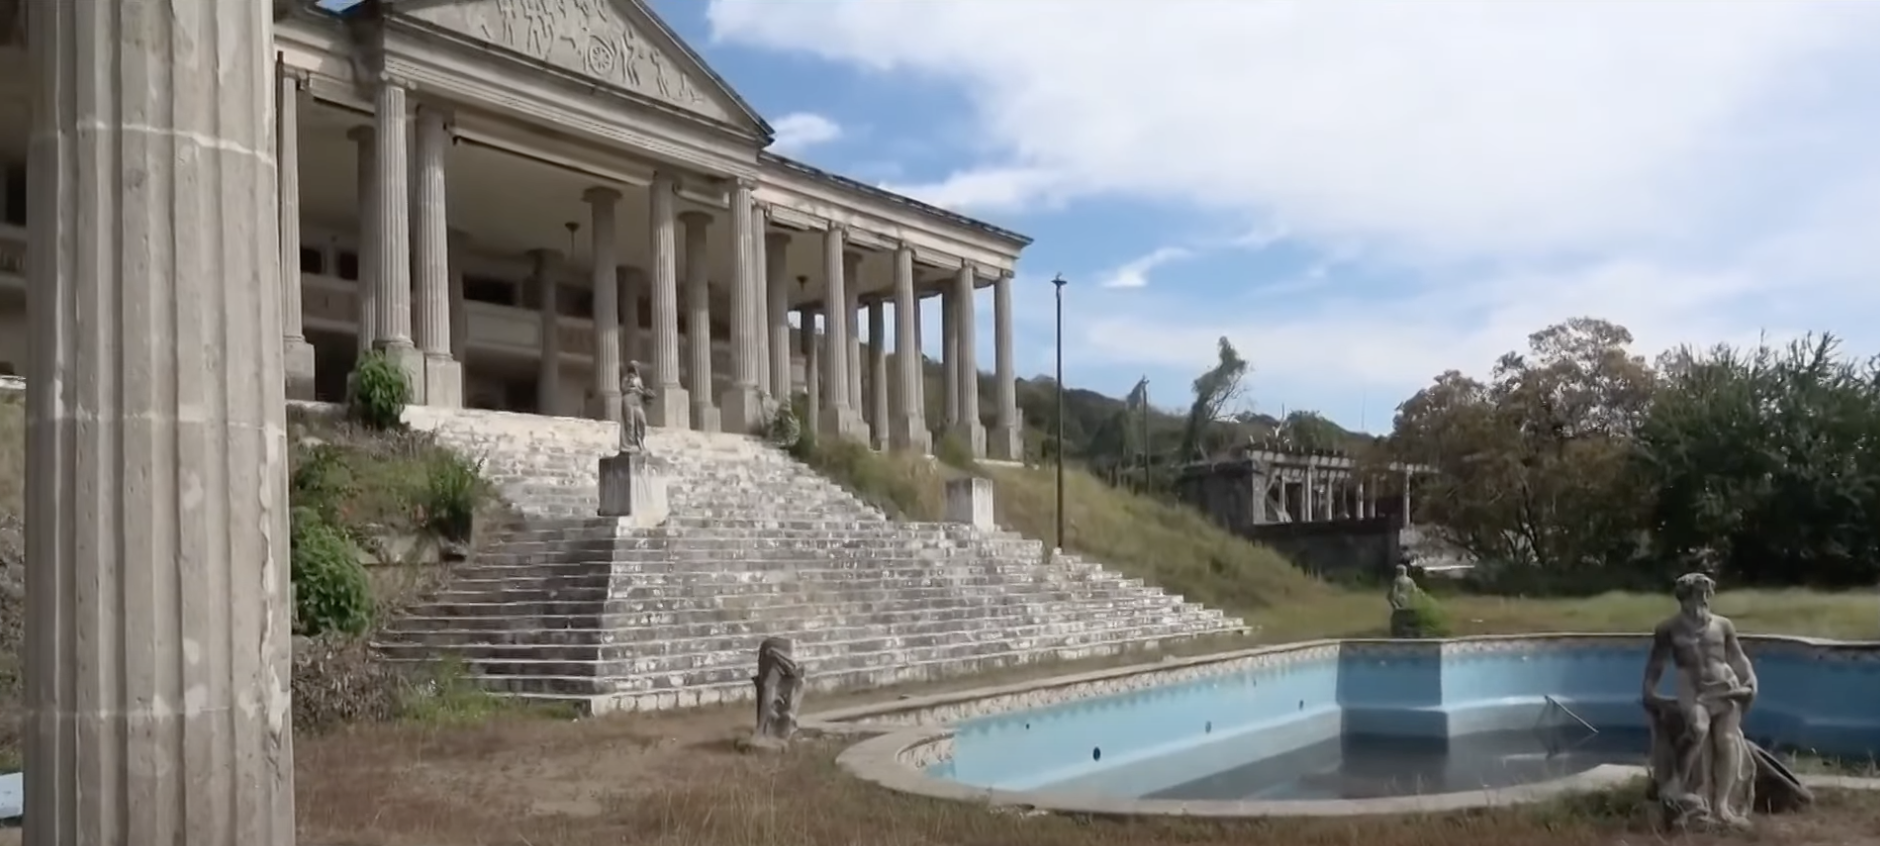 empty pool and a large marble staircase surrounded by statues